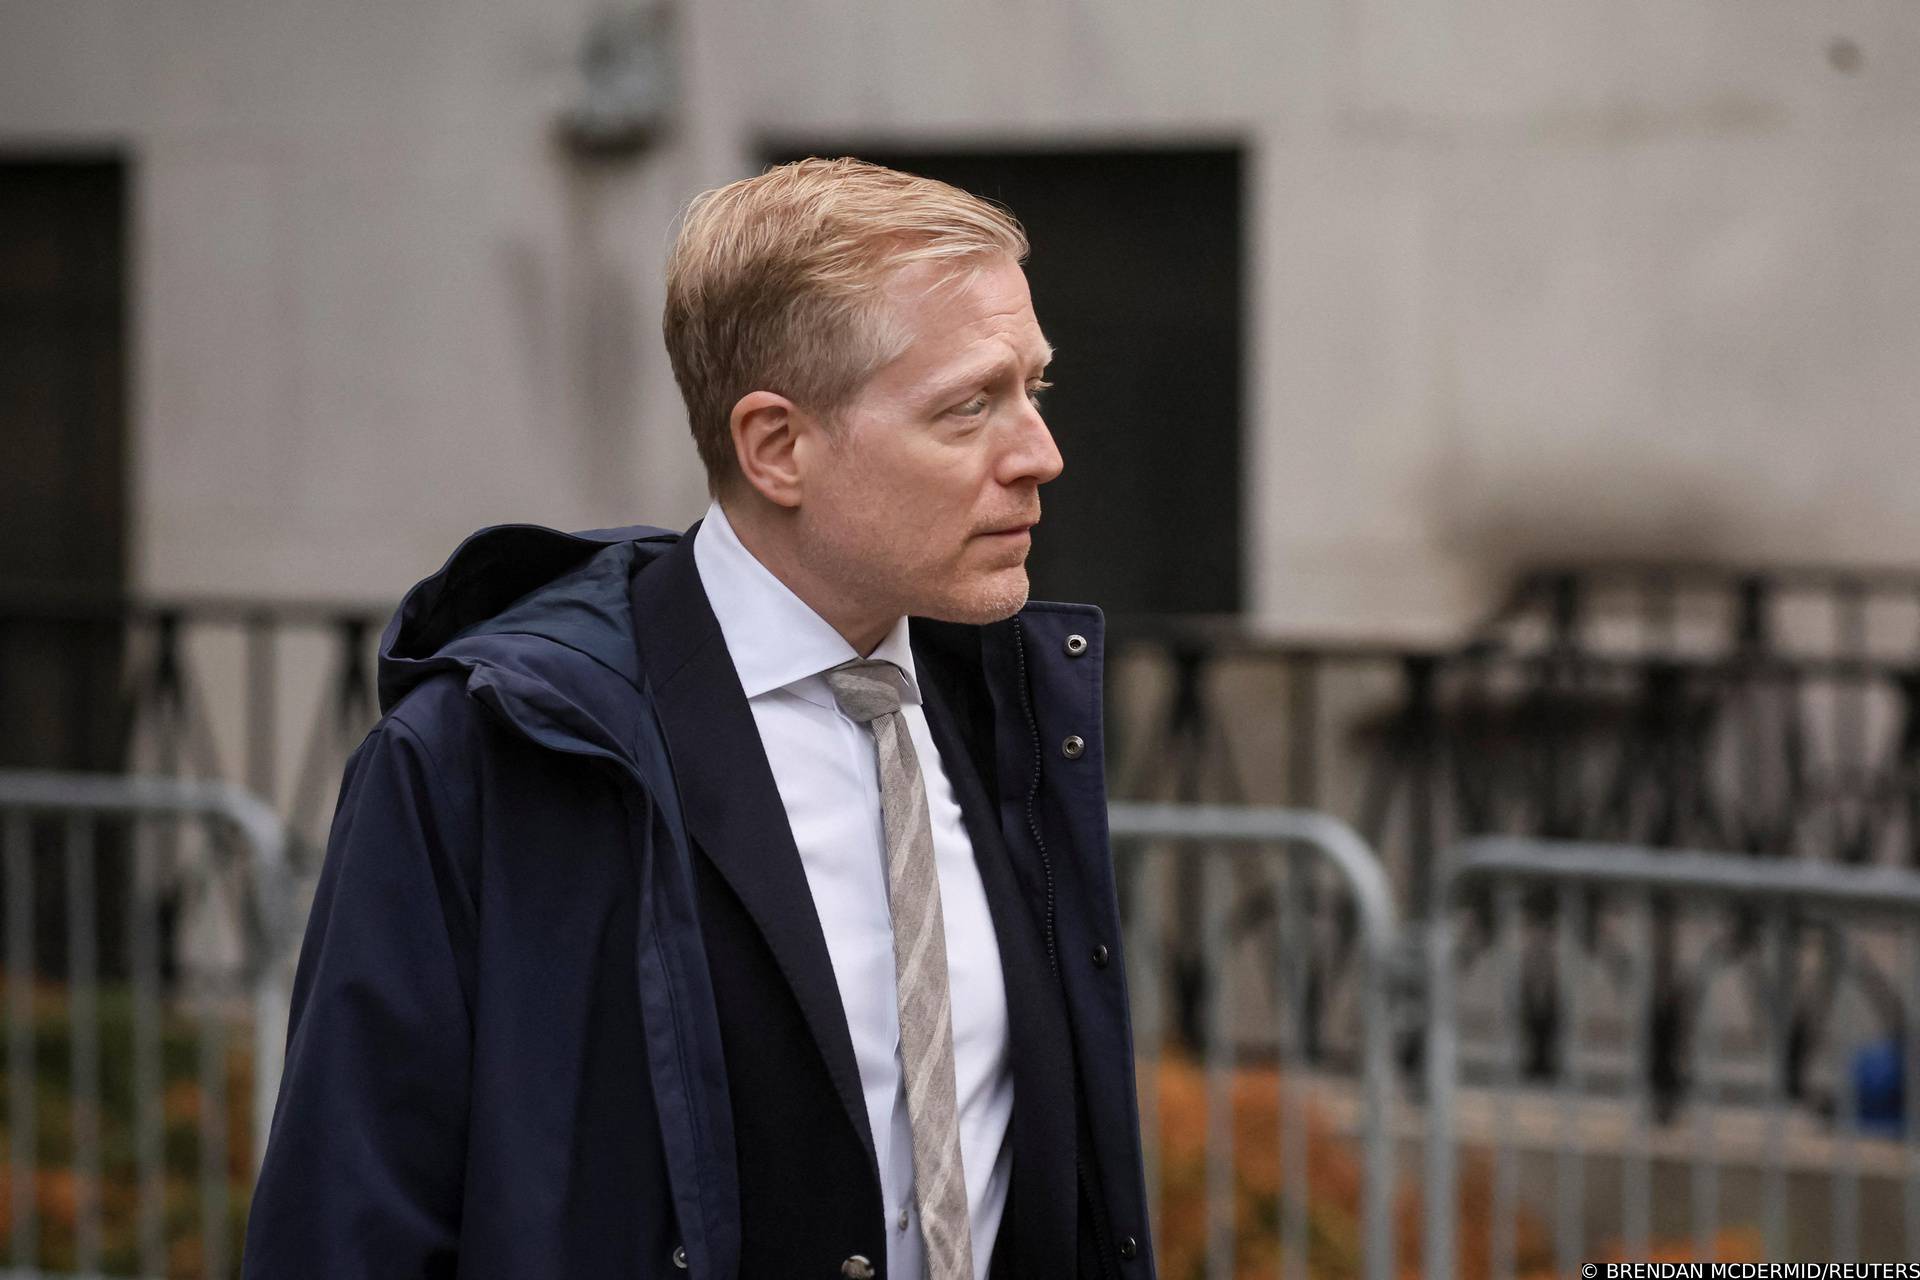 Actor Anthony Rapp departs the Manhattan Federal Court following his civil sex abuse case trial against Kevin Spacey in New York